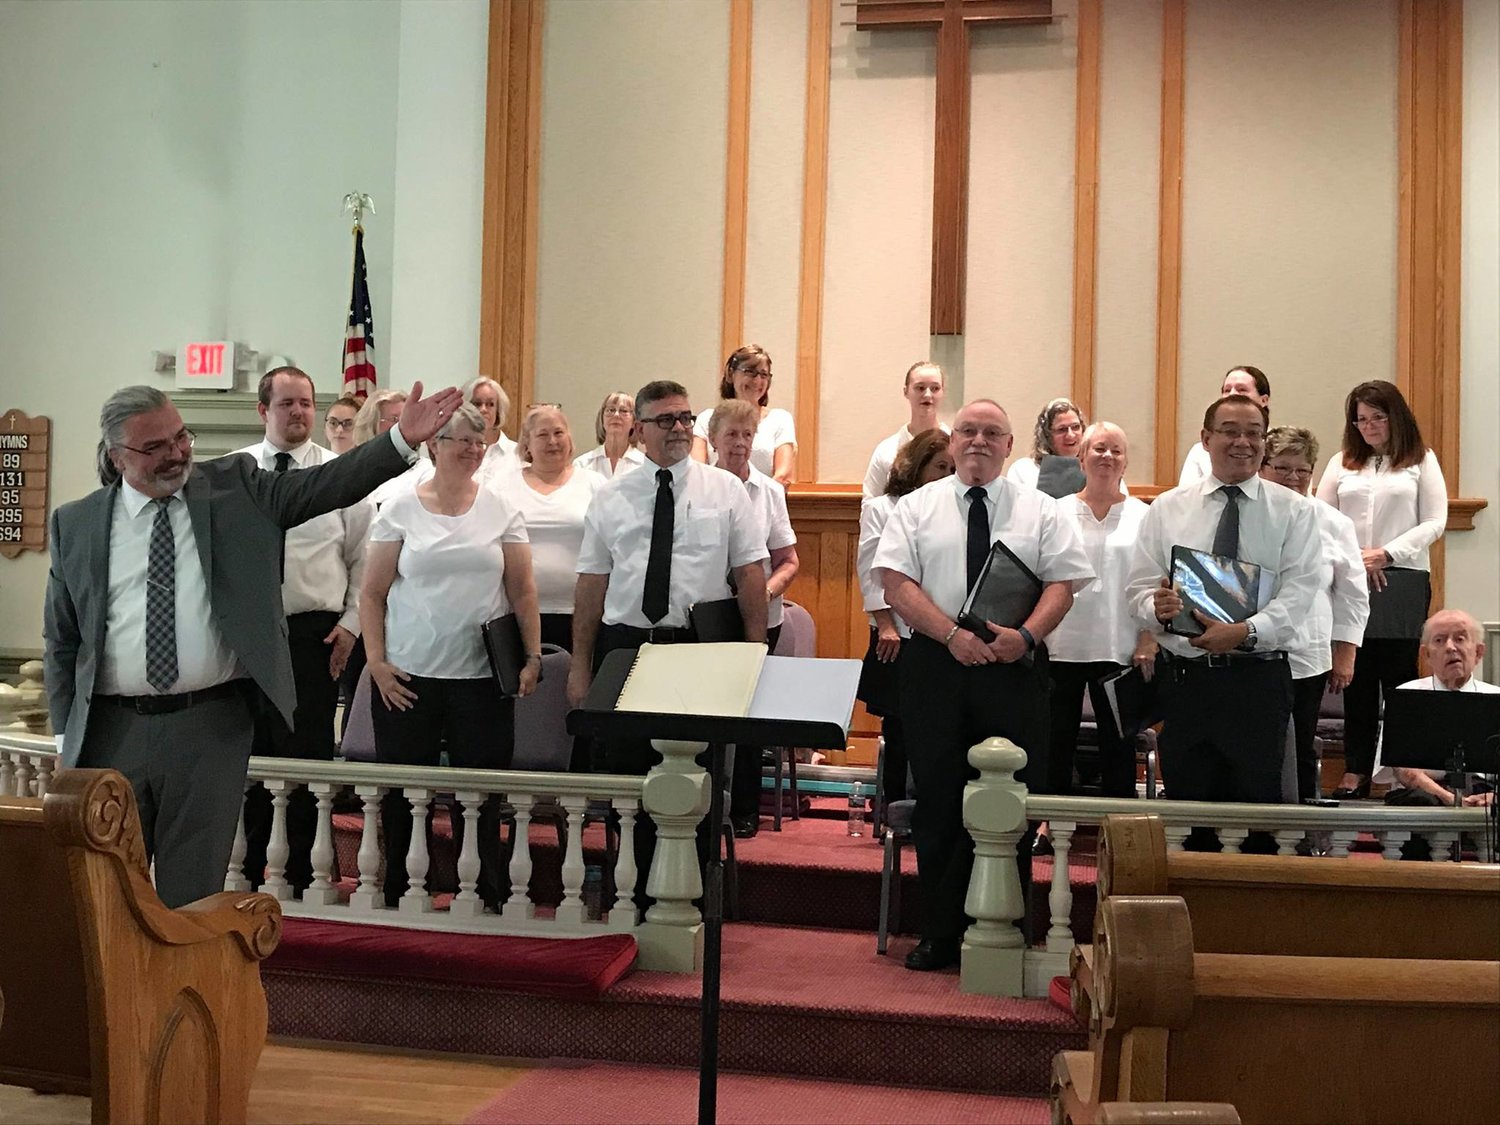 Just one of many performances: the Tri-State Chorale performed at the Kindred Spirits Free Classical Music Celebration in 2017.